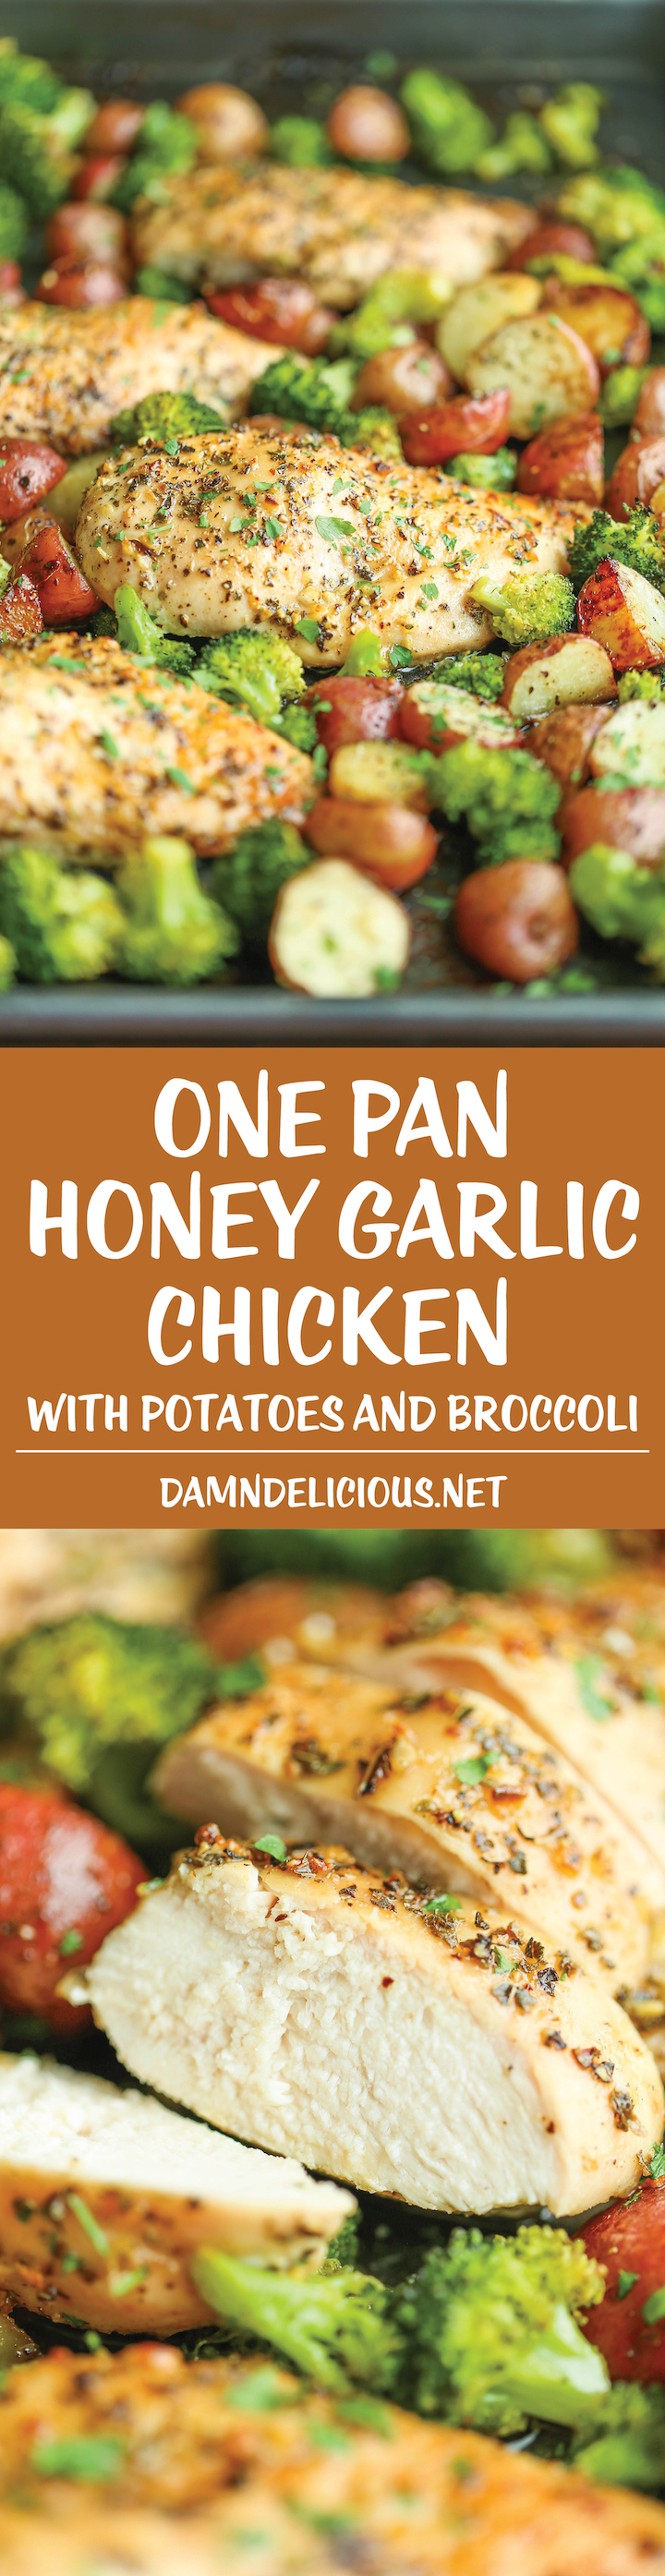 One Pan Honey Mustard Chicken and Vegetables